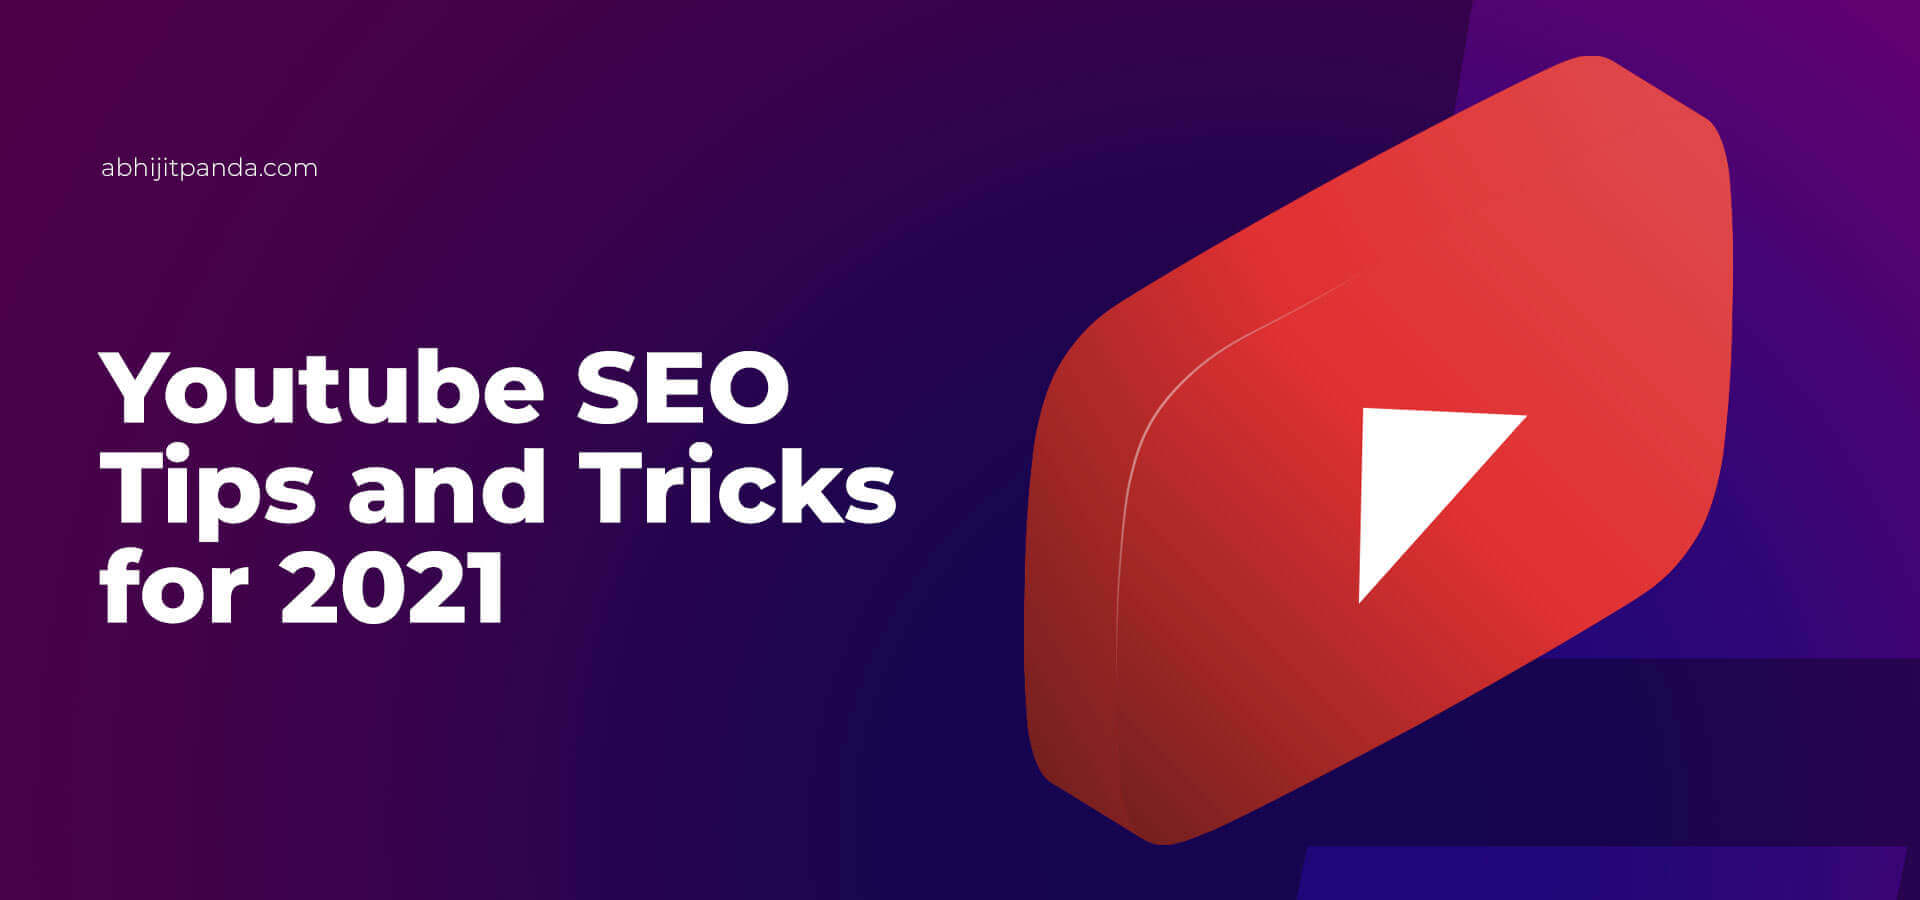 YouTube SEO Tips and Tricks for 2021